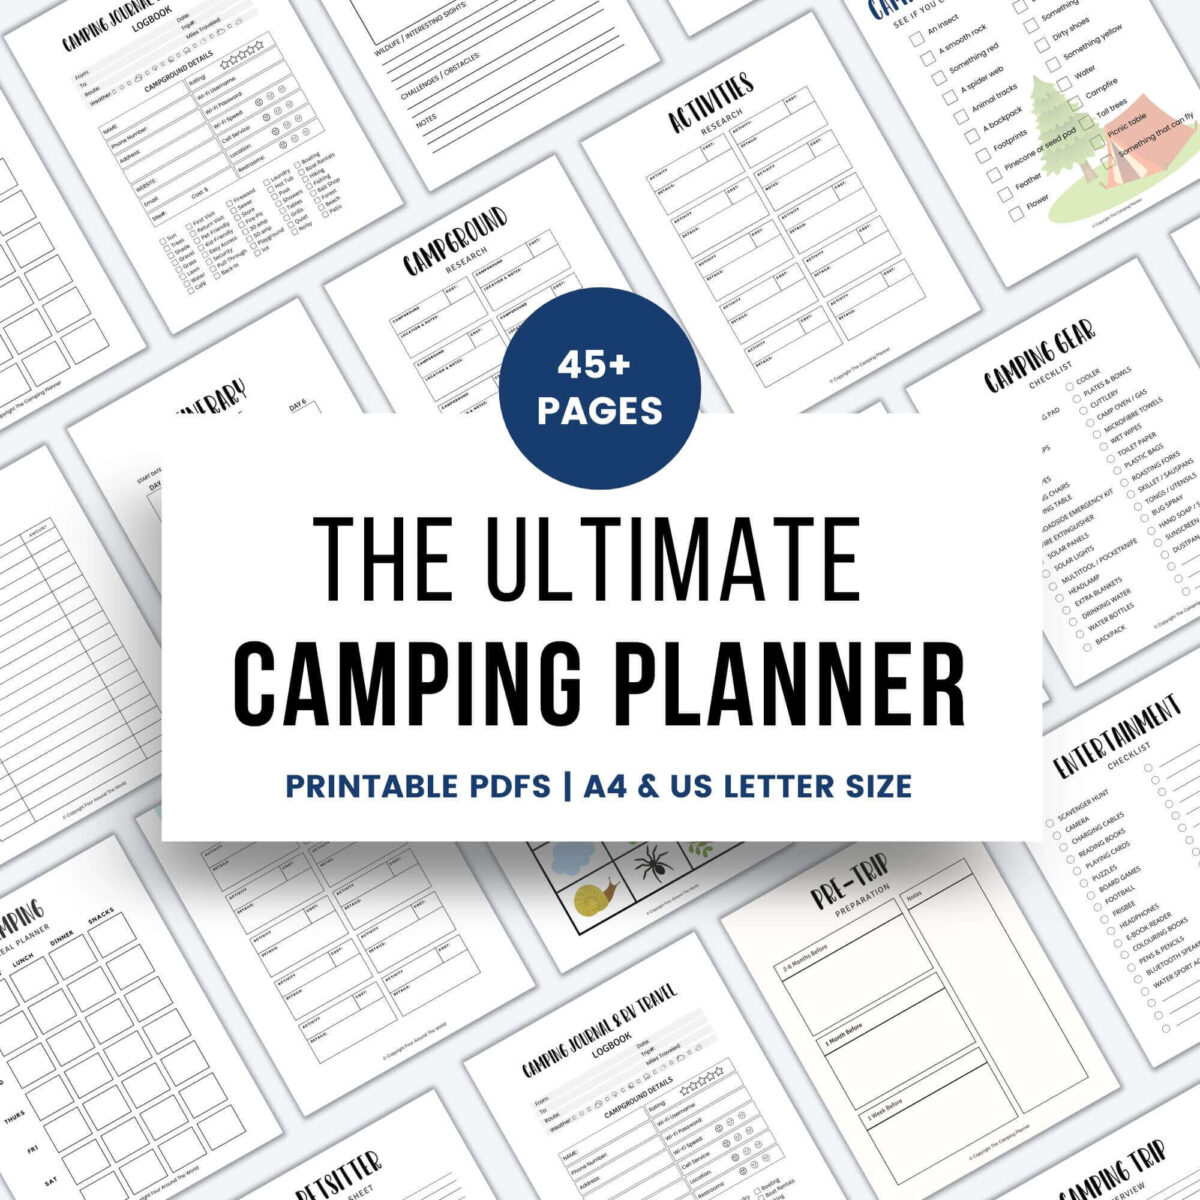 the ultimate camping planner shop square.